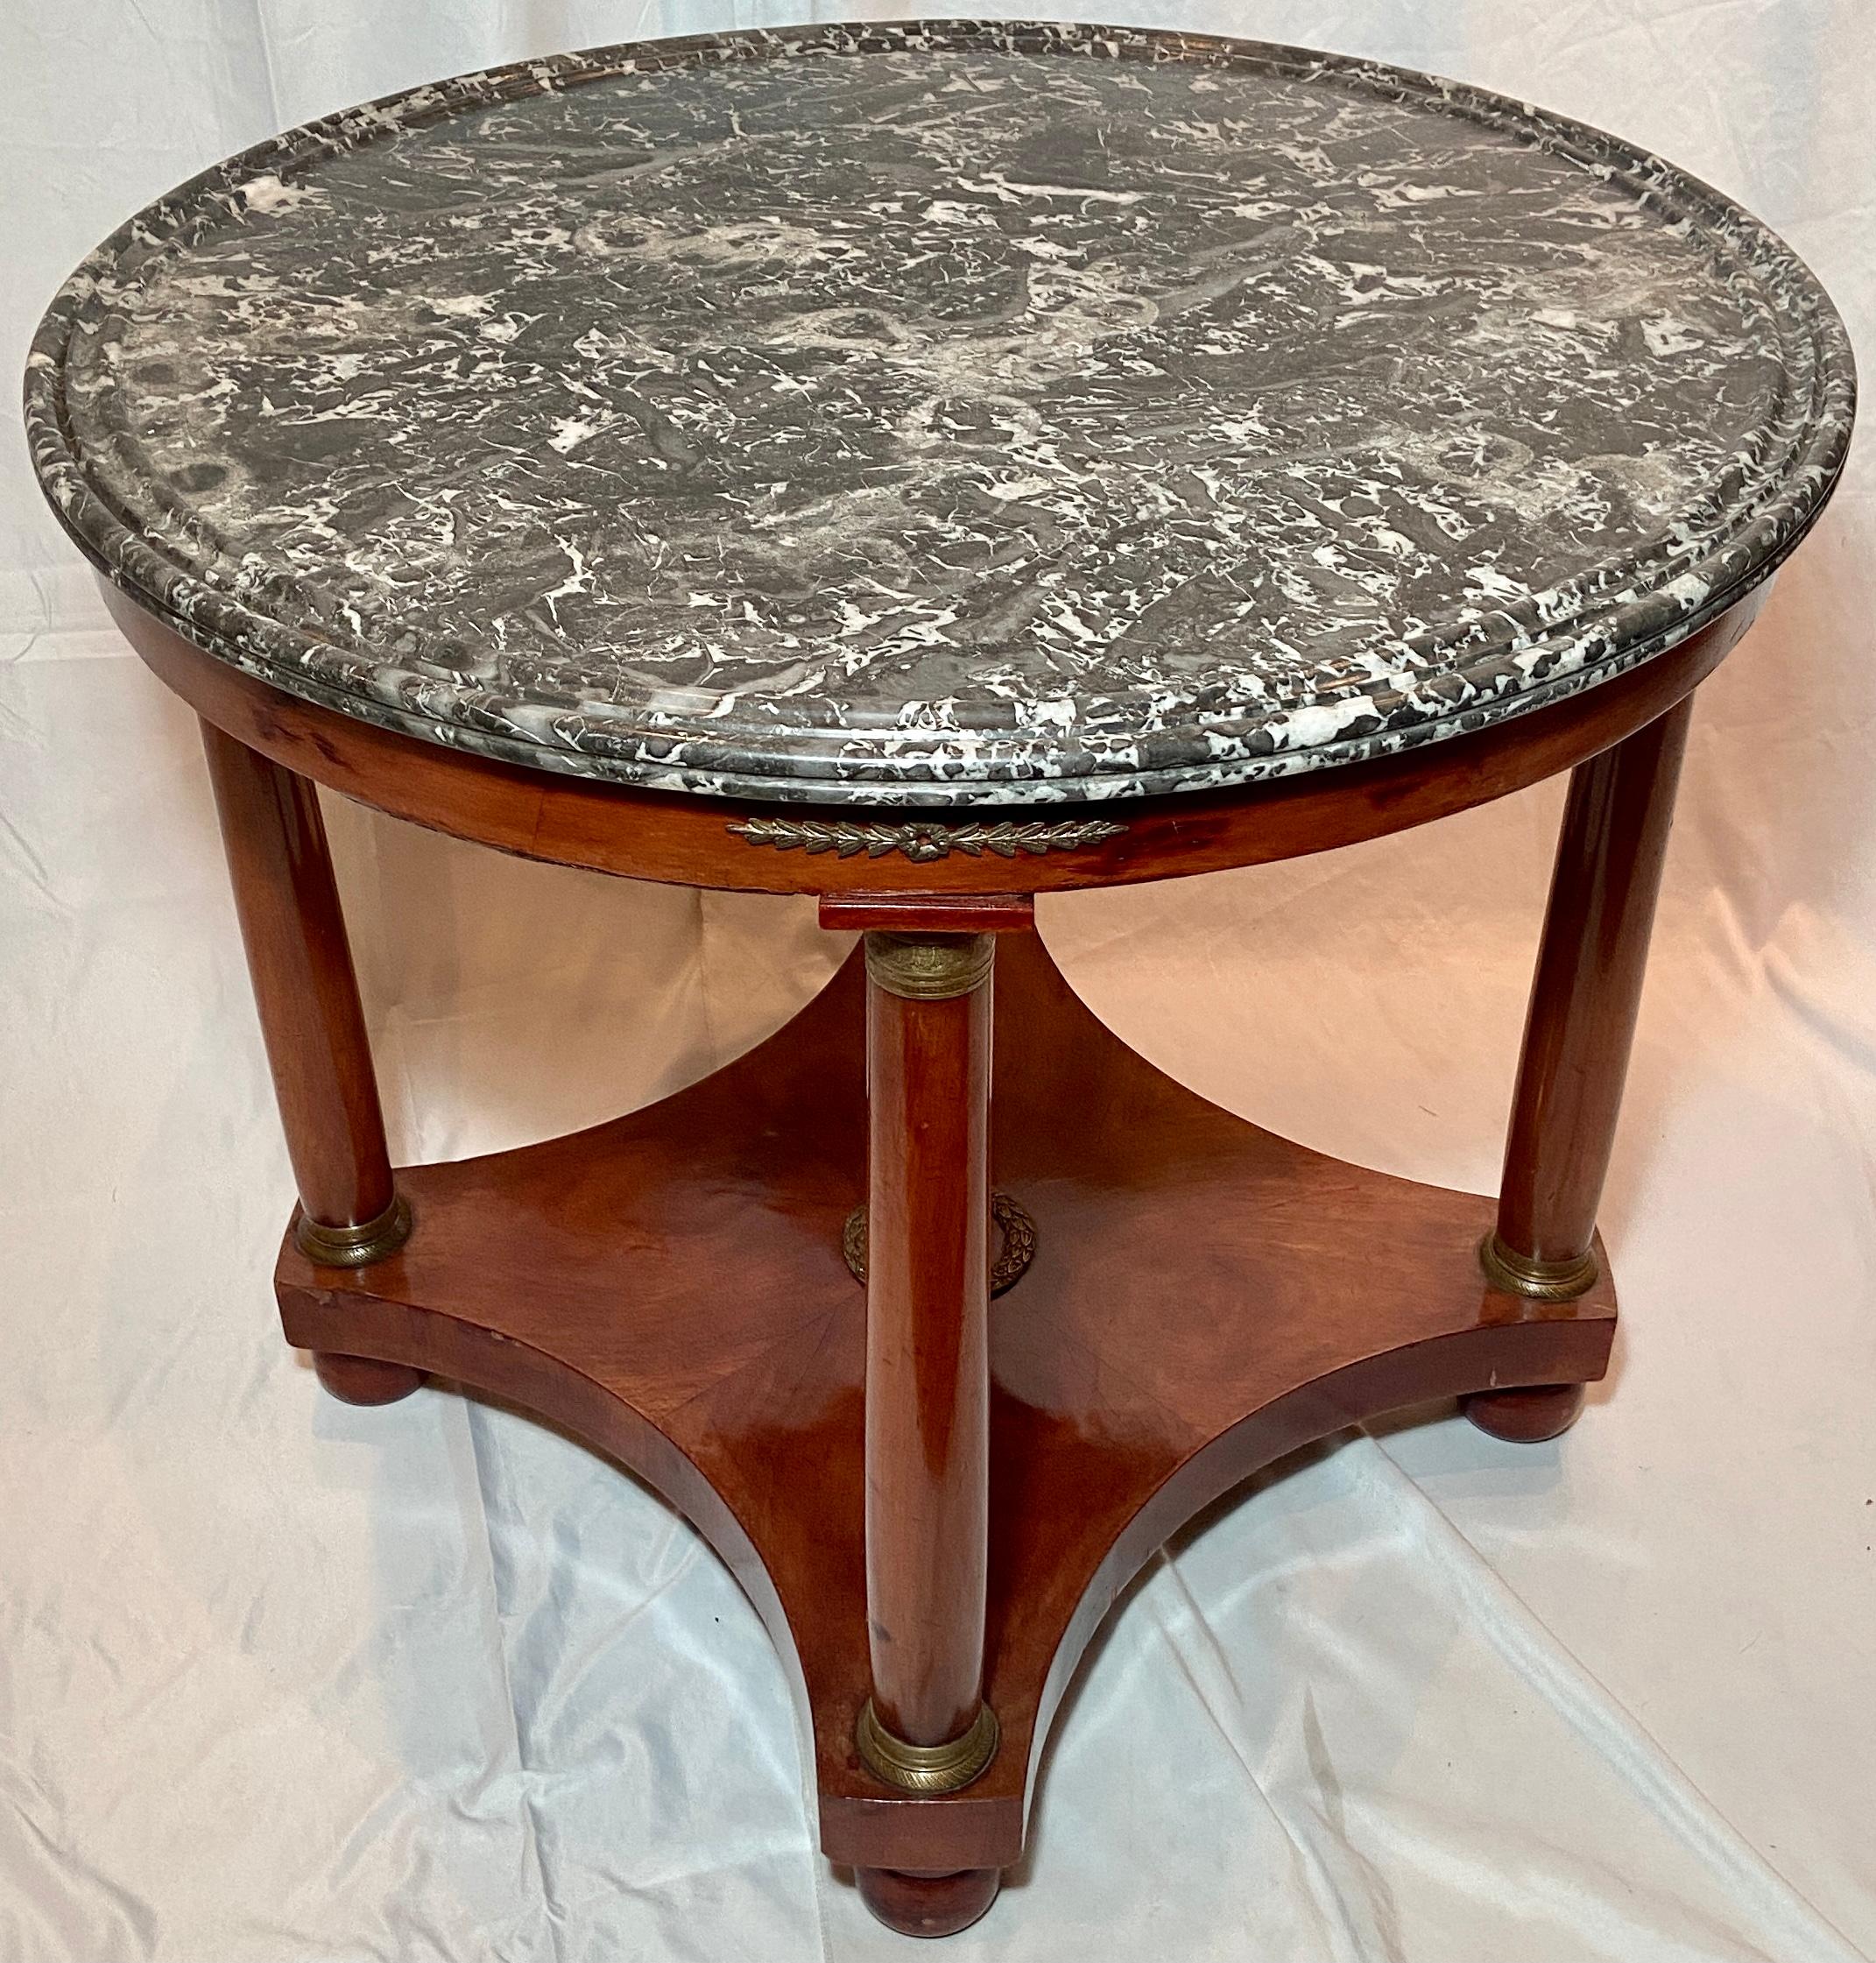 Antique French Empire bronze mounted marble-top mahogany center table Circa 1880.
A very handsome mahogany table with accompanying bronze decorative elements.